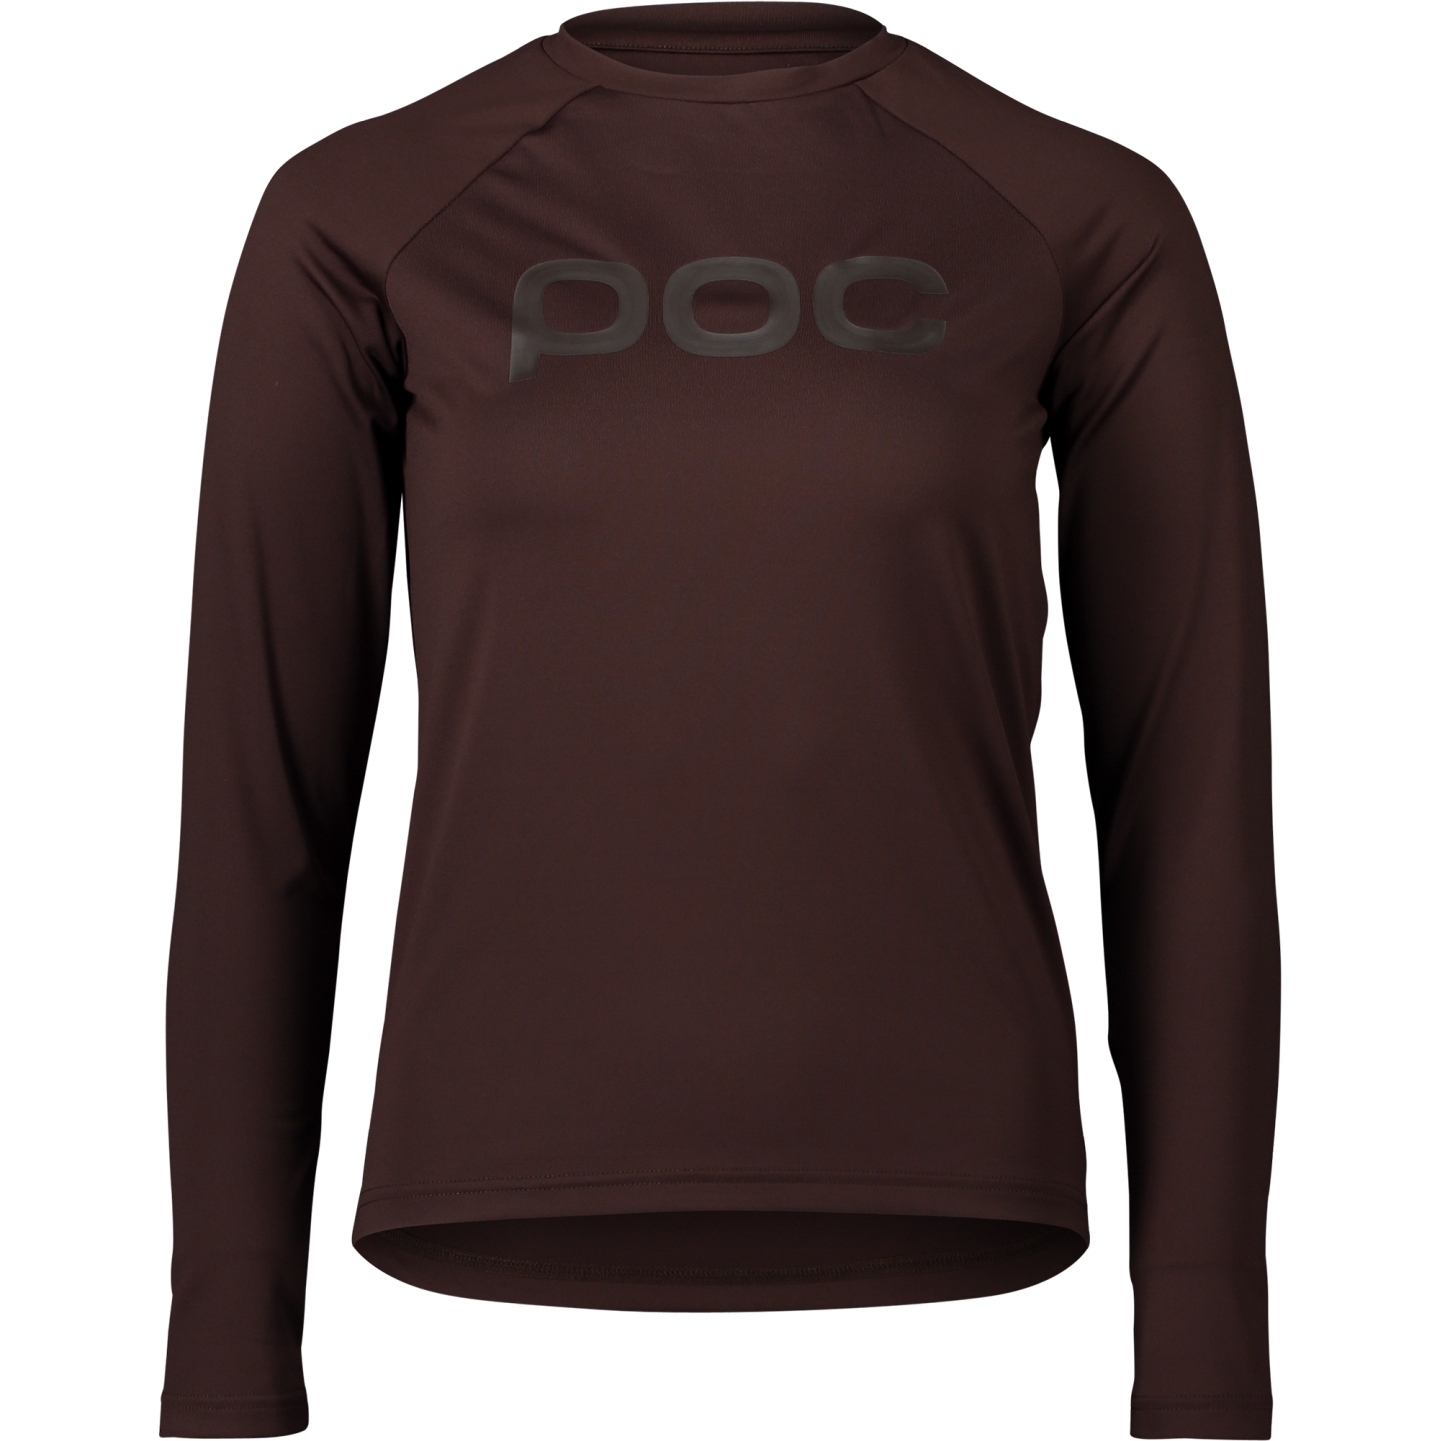 Picture of POC Reform Enduro Jersey Women - 1816 Axinite Brown